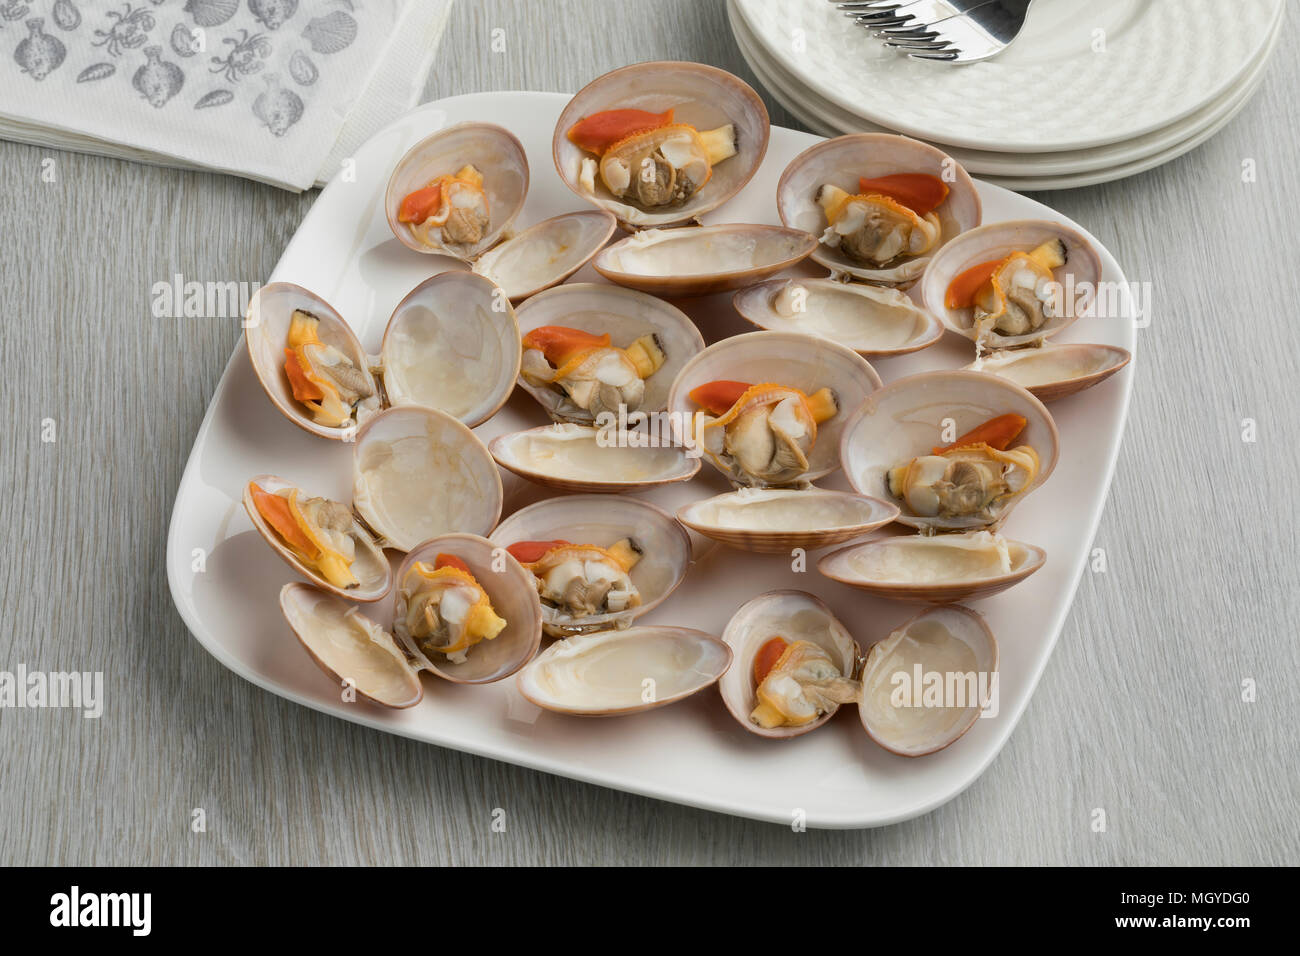 Dish with open cooked smooth clams as a gourmet Stock Photo